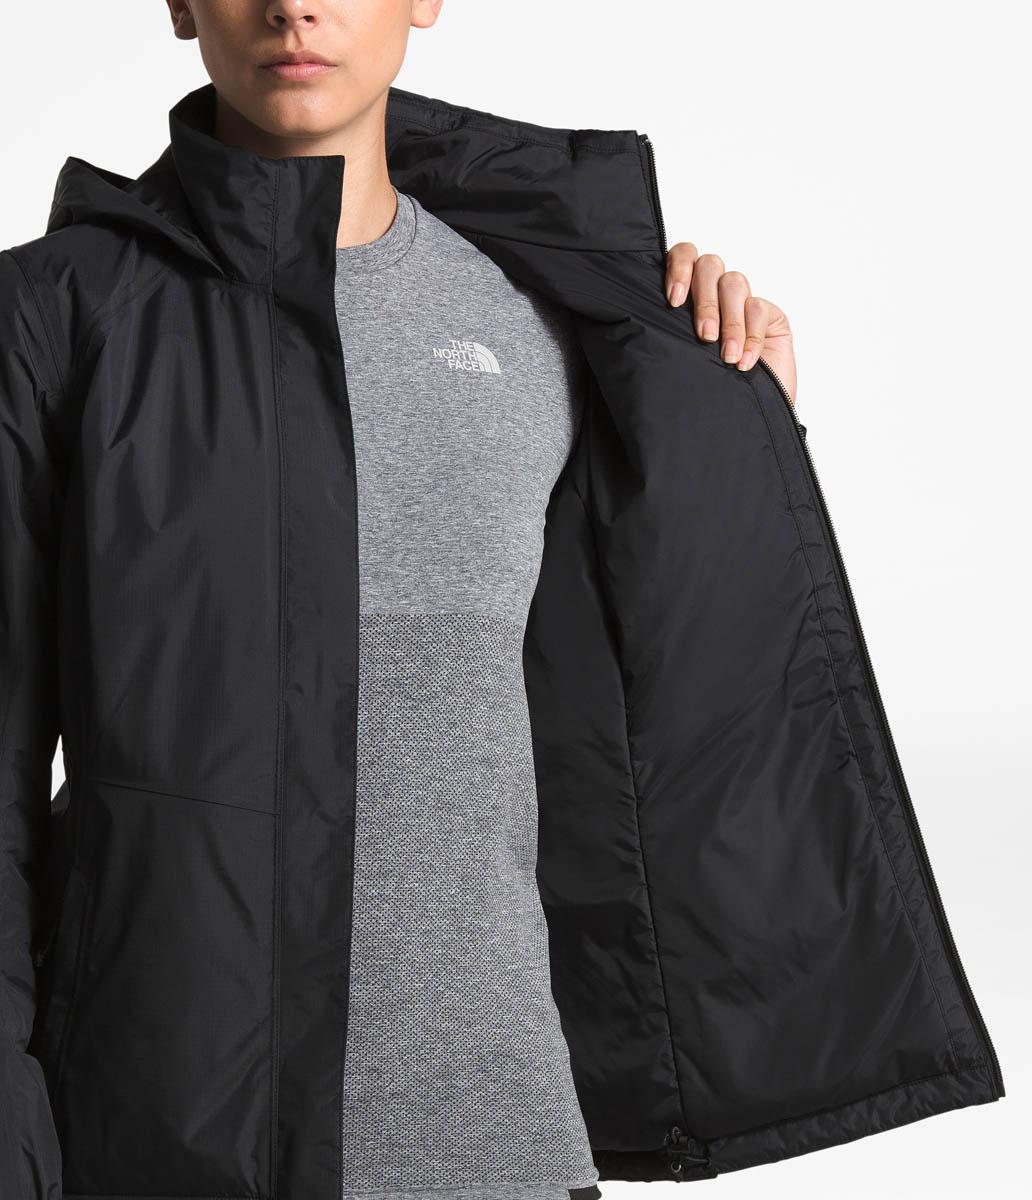 north face resolve insulated jacket